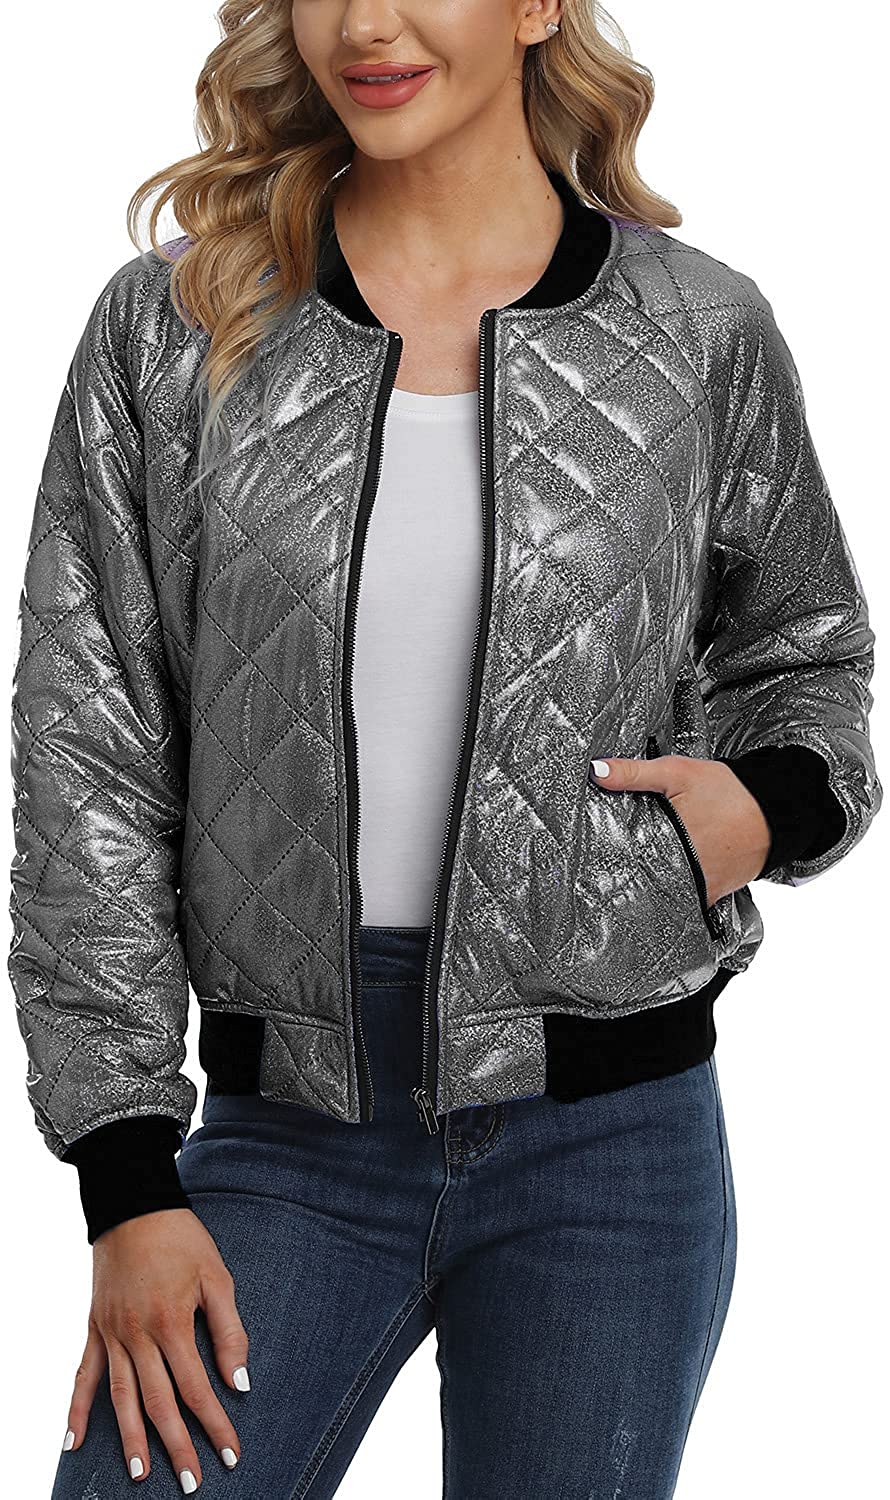 Buy Womens Quilted Bomber Jacket Long Sleeve Zip Up Button Down Lightweight  Jacket Coat with Pockets, Grey, Medium at .in